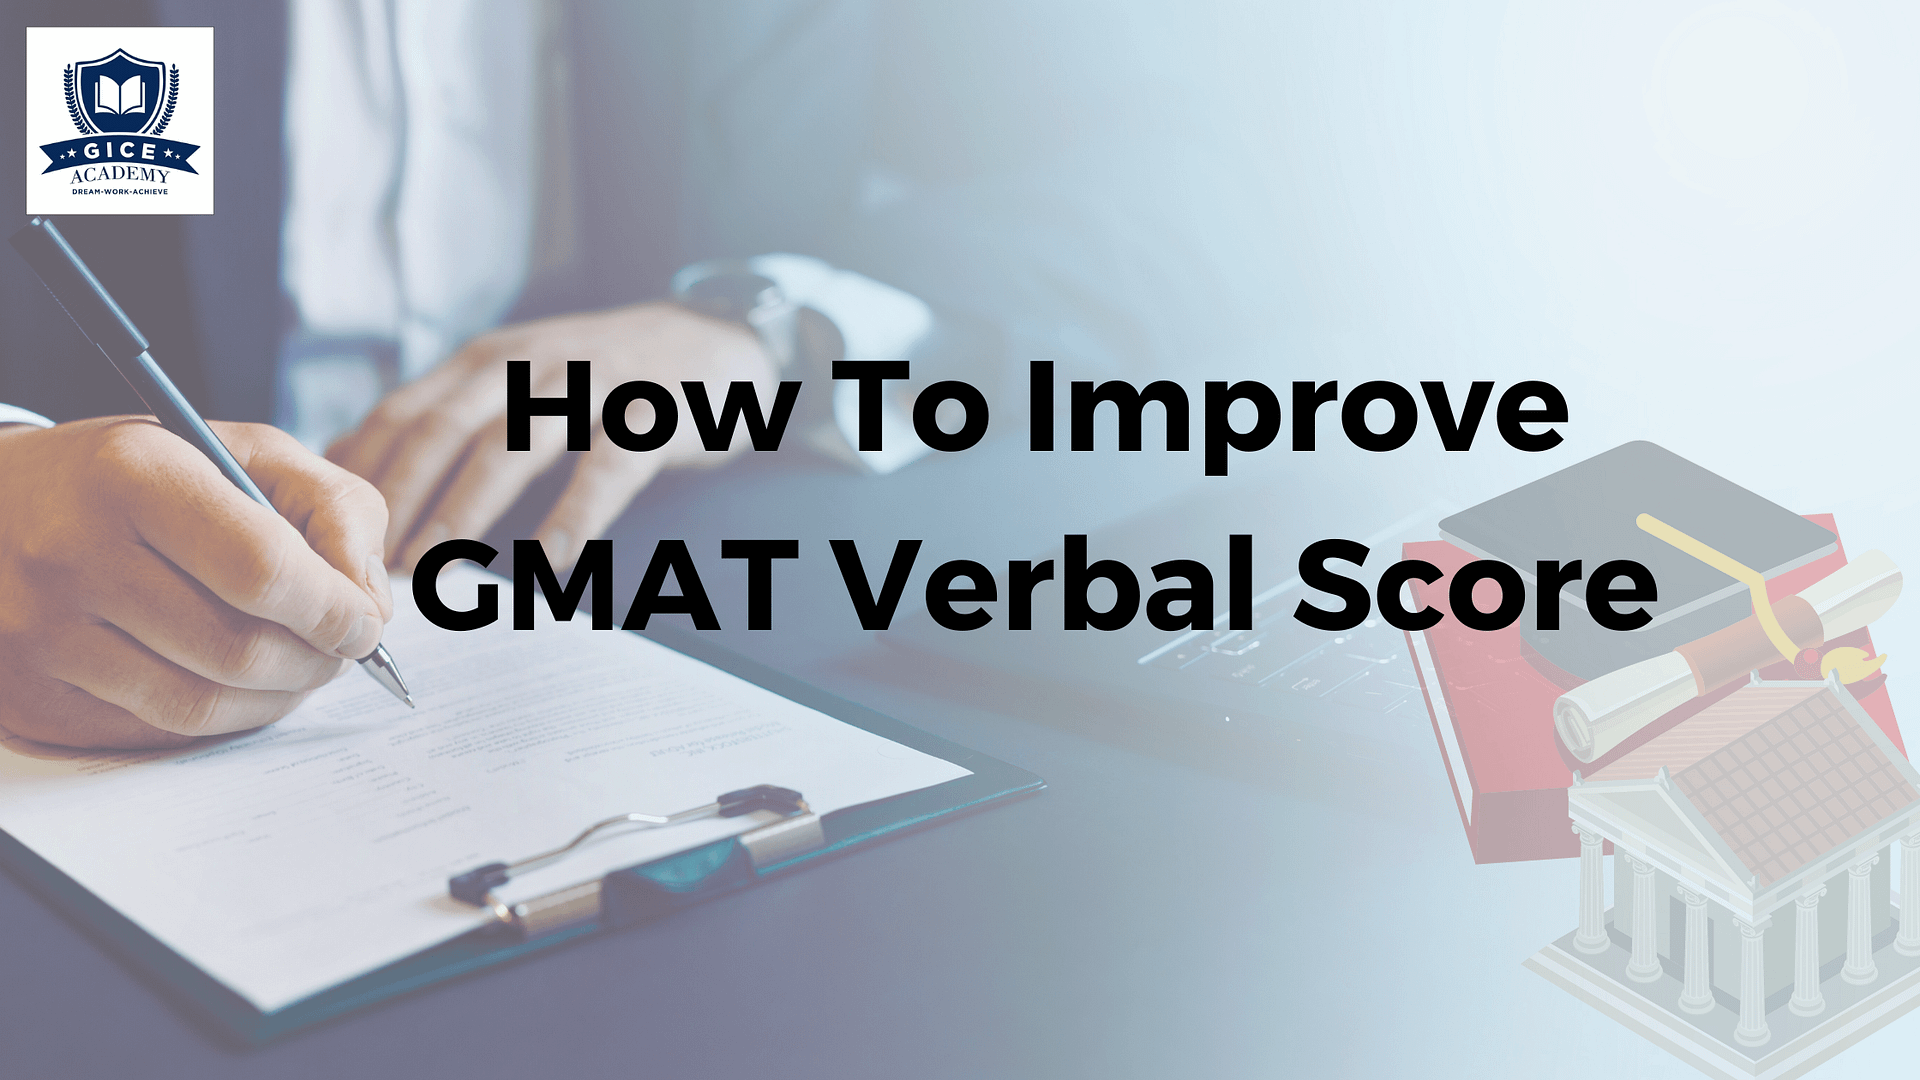 How To Improve GMAT Verbal Score | Tips and Tricks